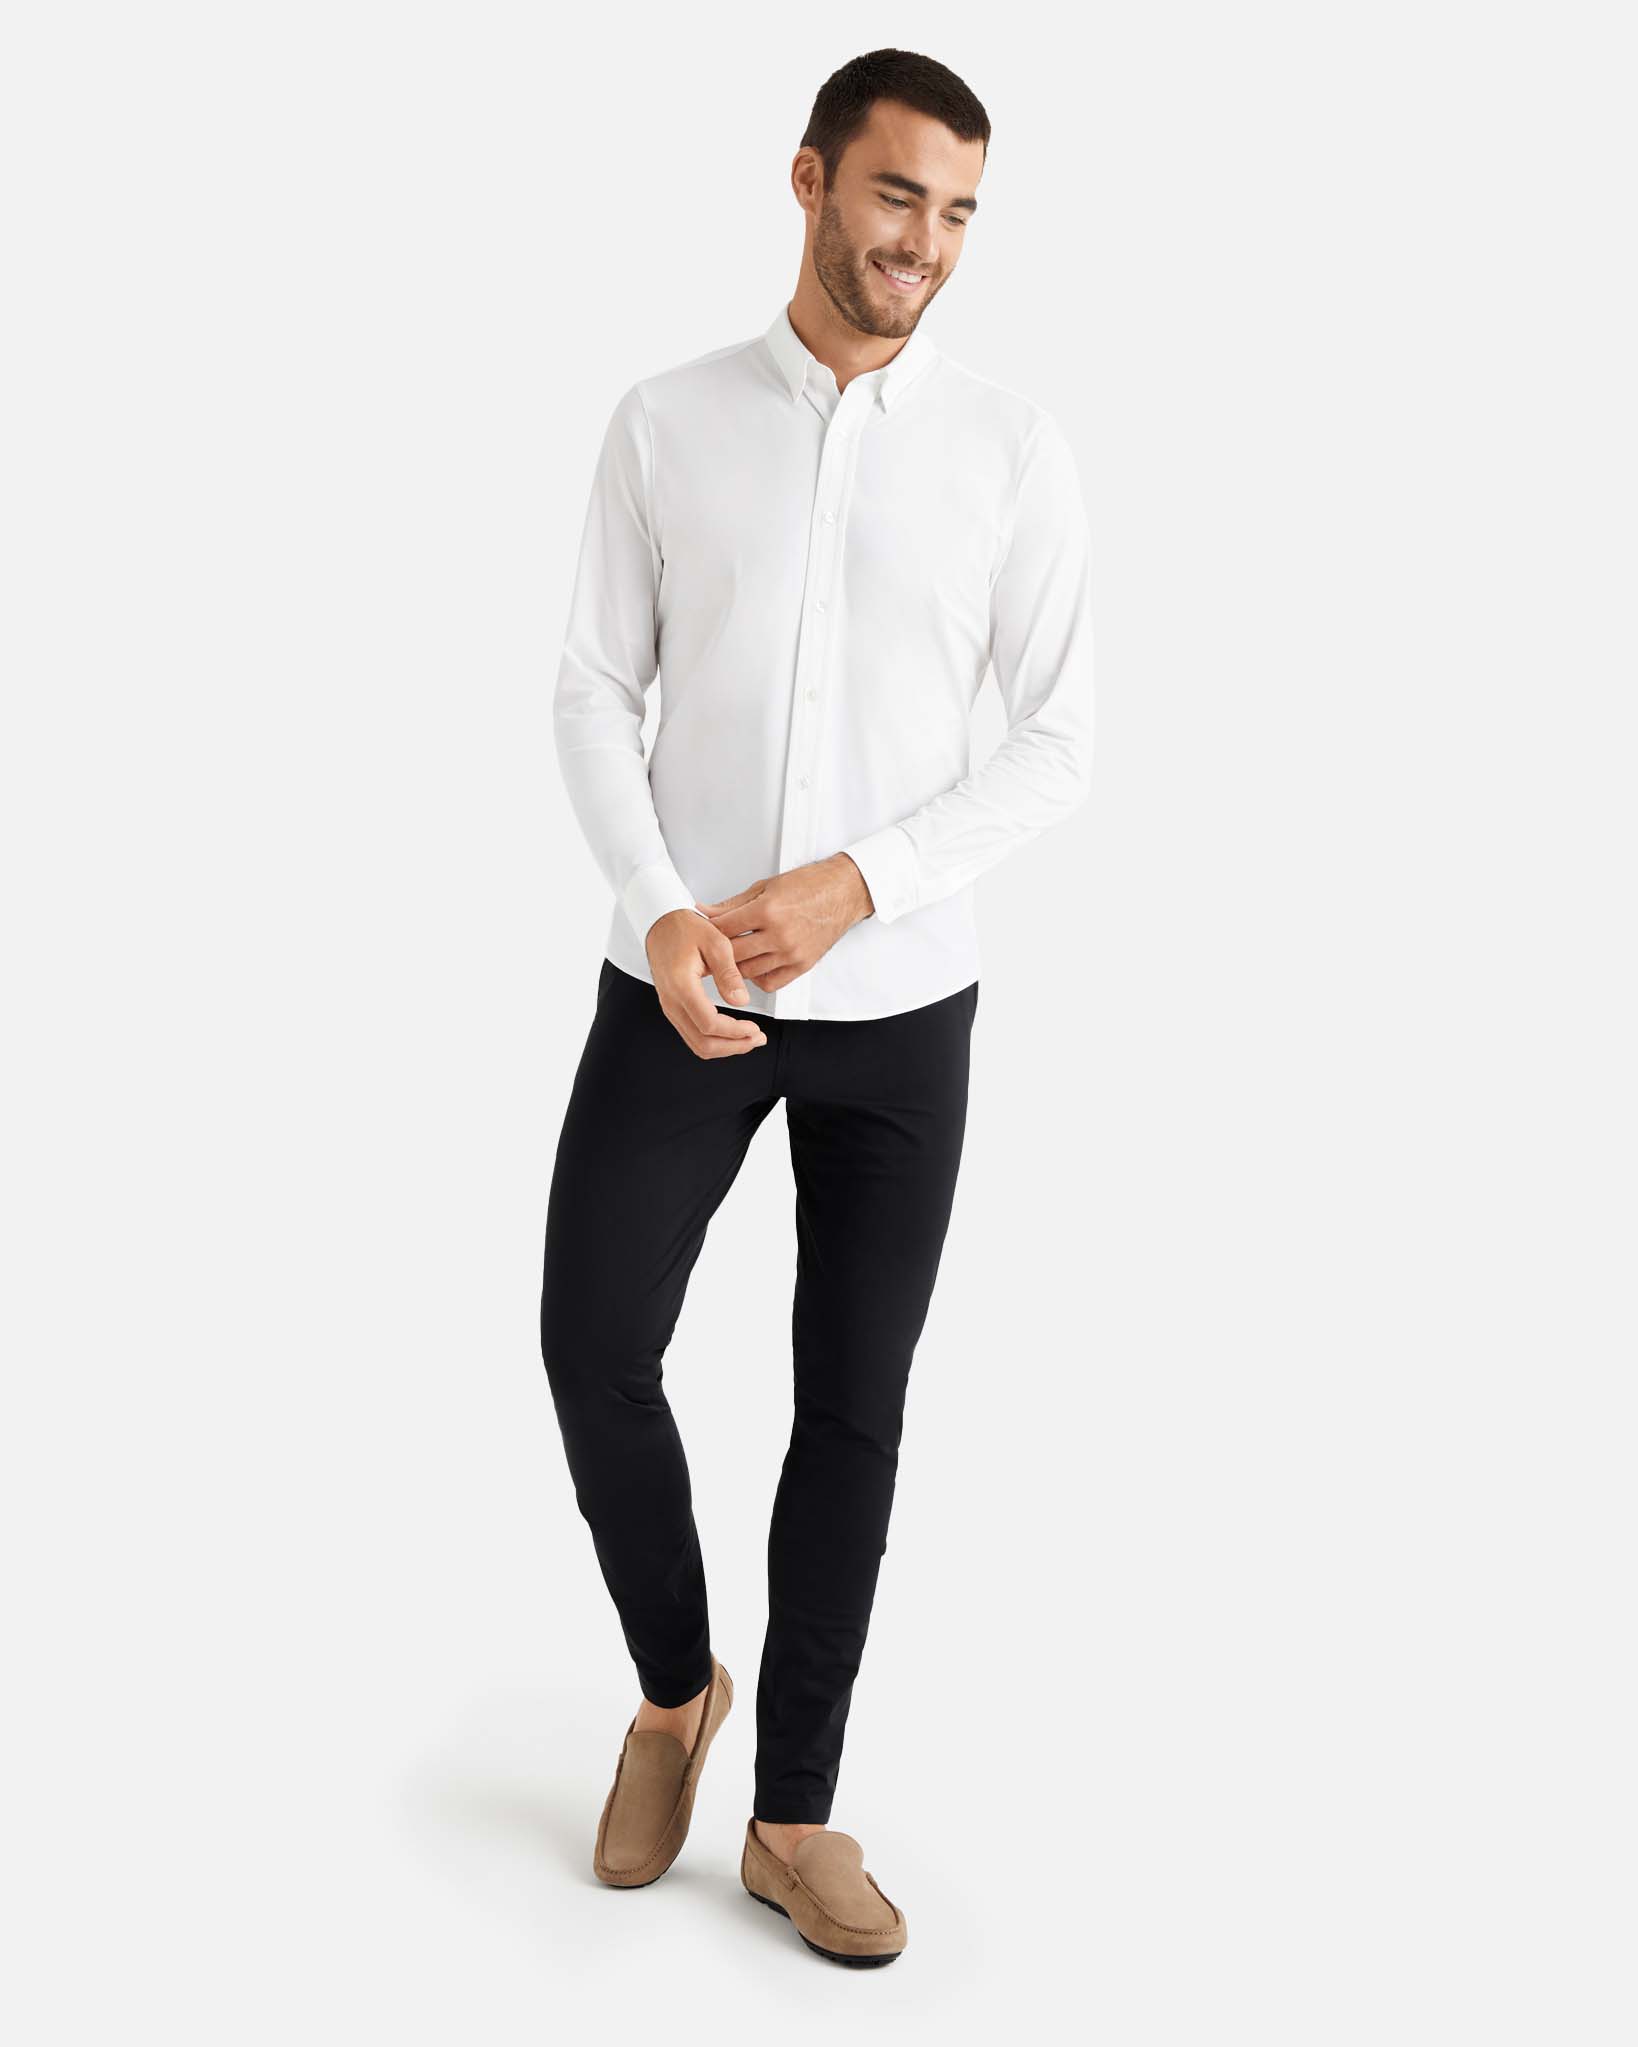 Rhone Black Colored Commuter Slim Fit Pants – THE WEARHOUSE